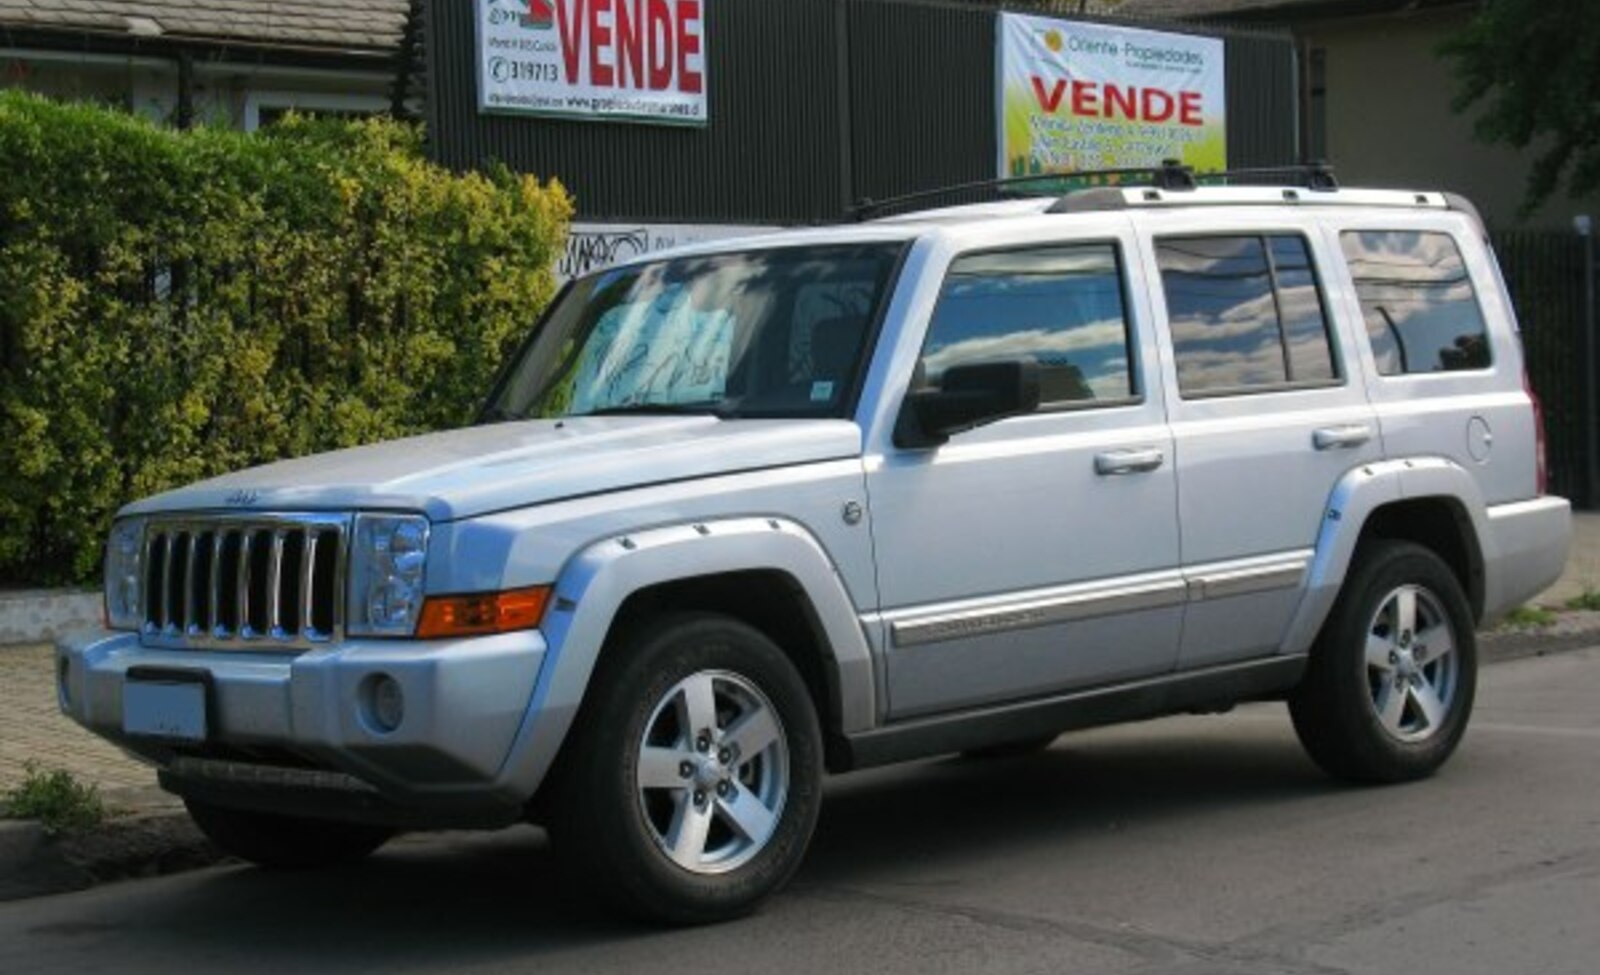 Jeep Commander 3.0 V6 CRD (218 Hp) 4WD Automatic 2006, 2007, 2008, 2009, 2010